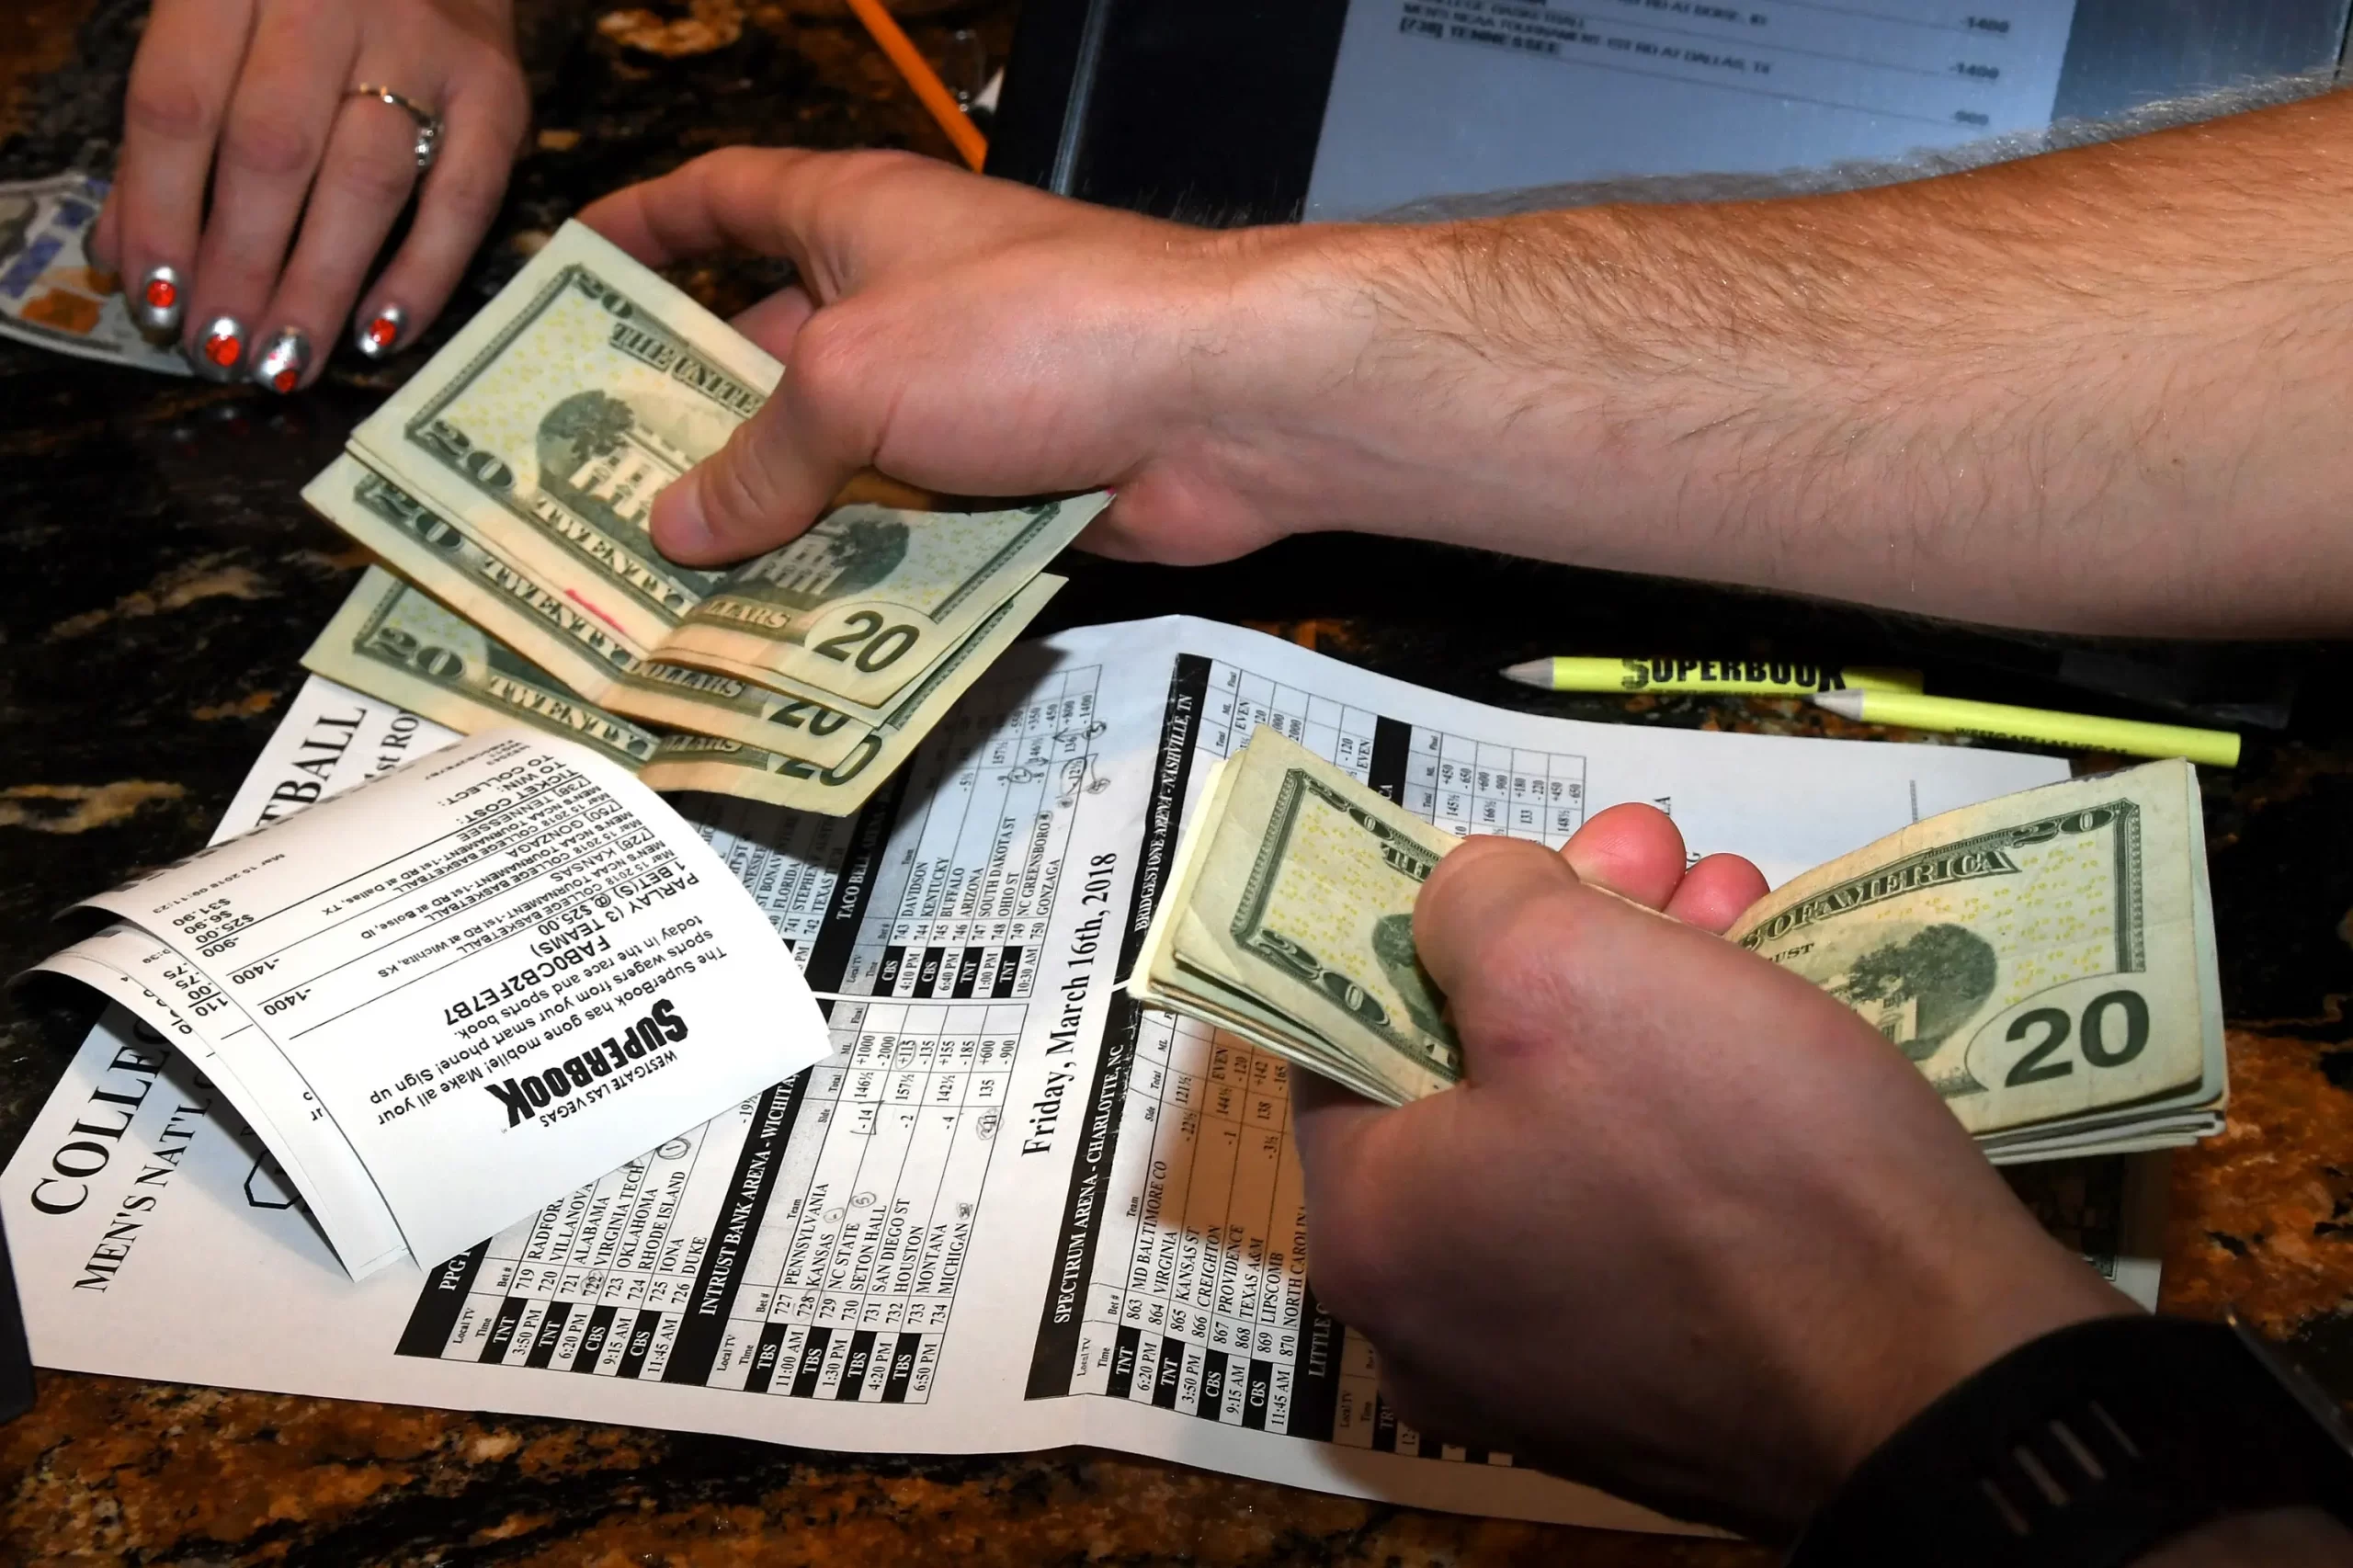 Action in Sports Betting